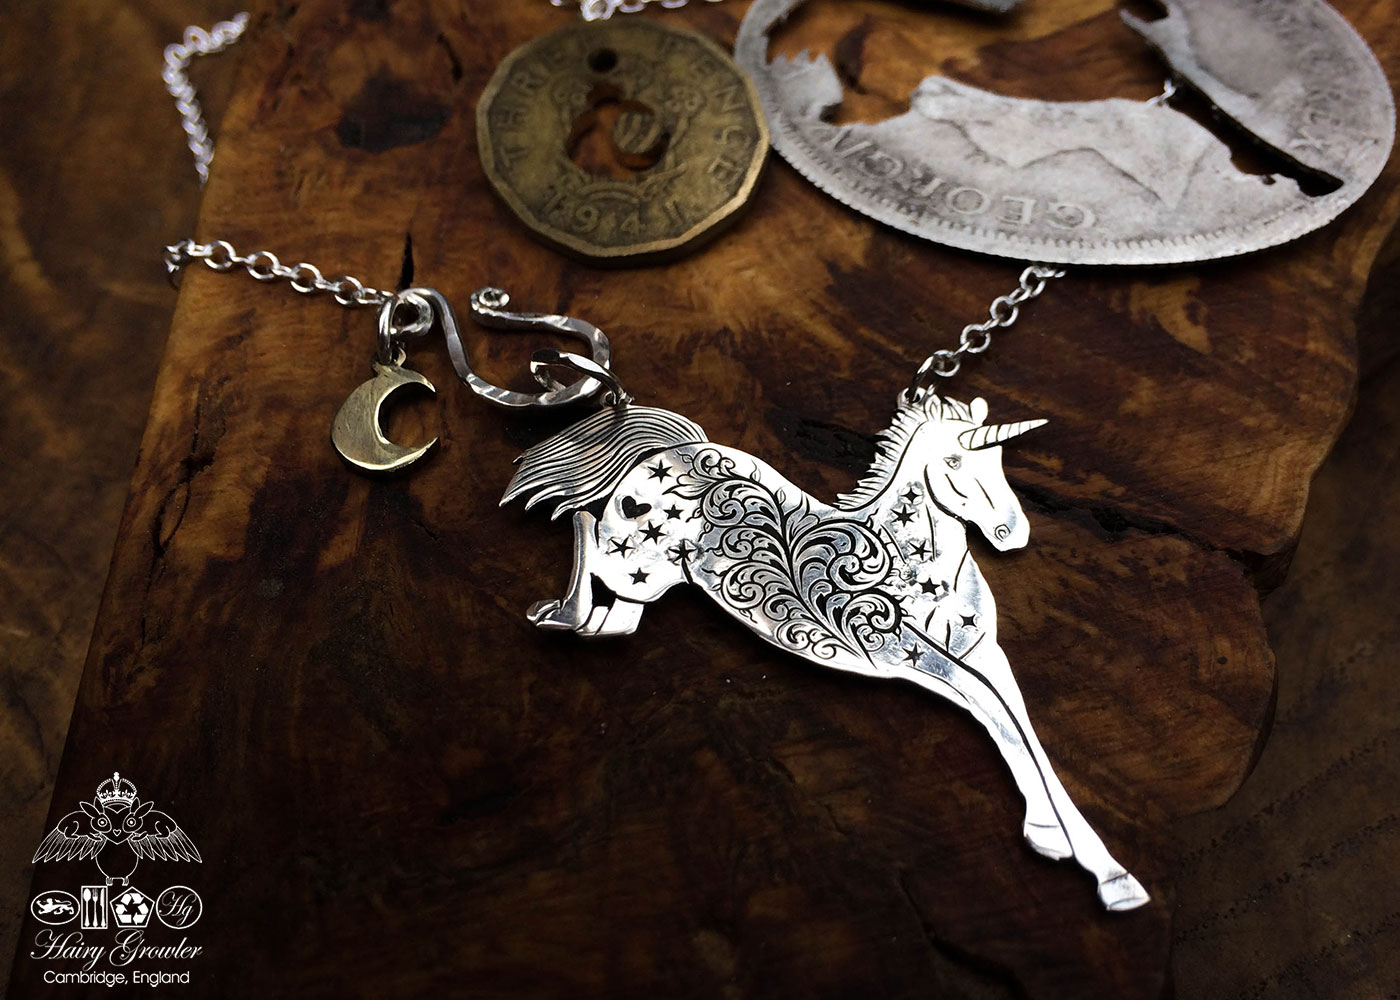 Gorgeous, stylish, eco-friendly, green, ethical and individual. The Hairy Growler silver unicorn necklace is meticulously handcrafted in Cambridge, UK.